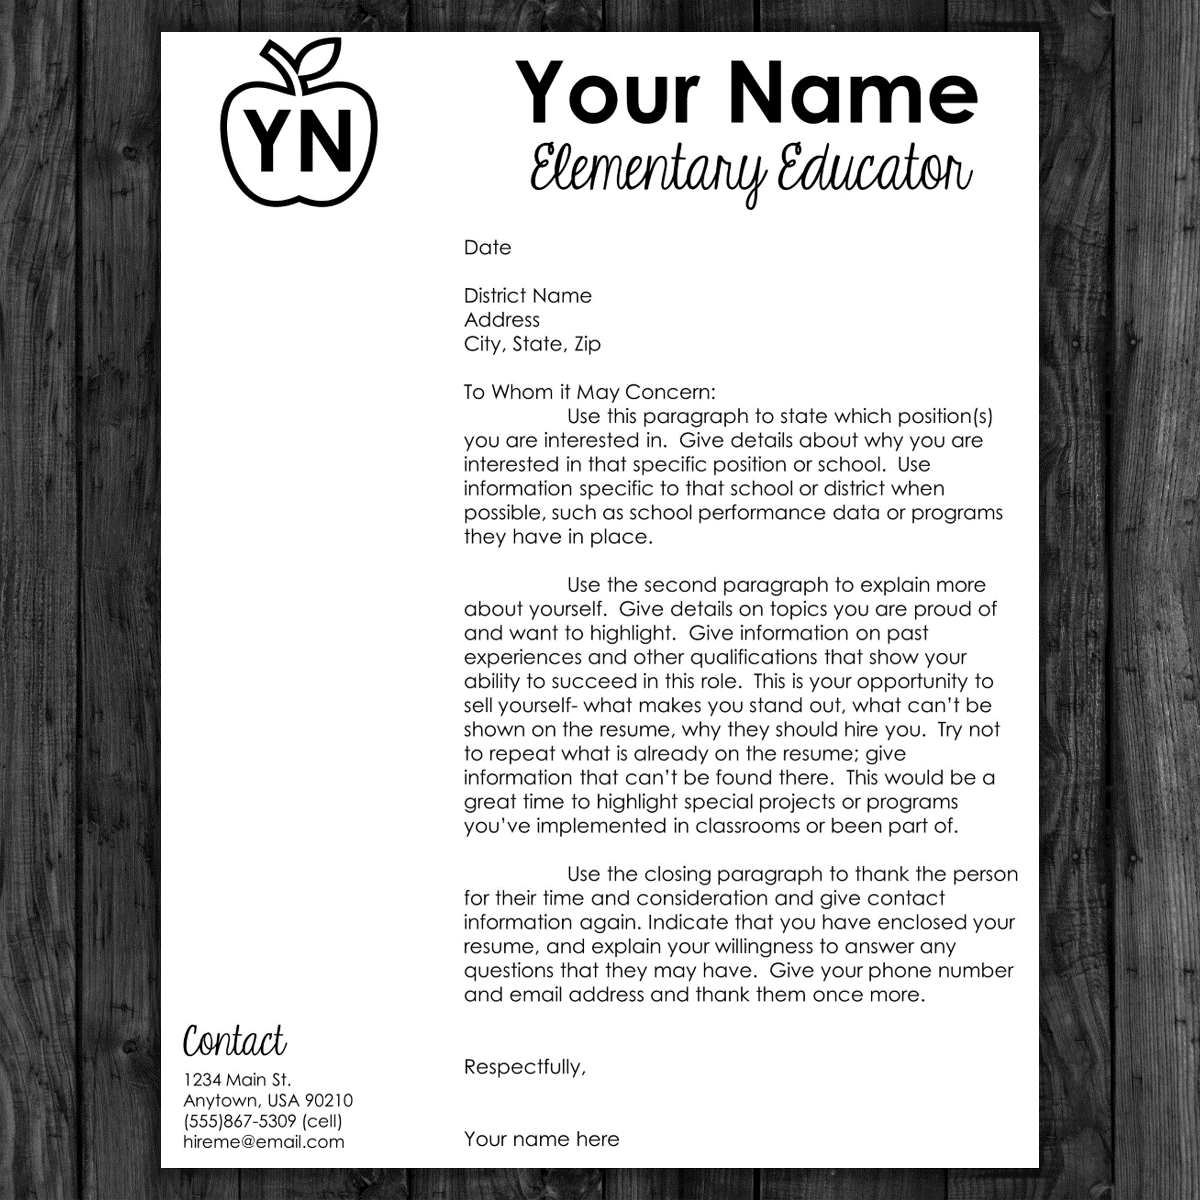 Teacher cover letter template on gray tablet with sample name and text